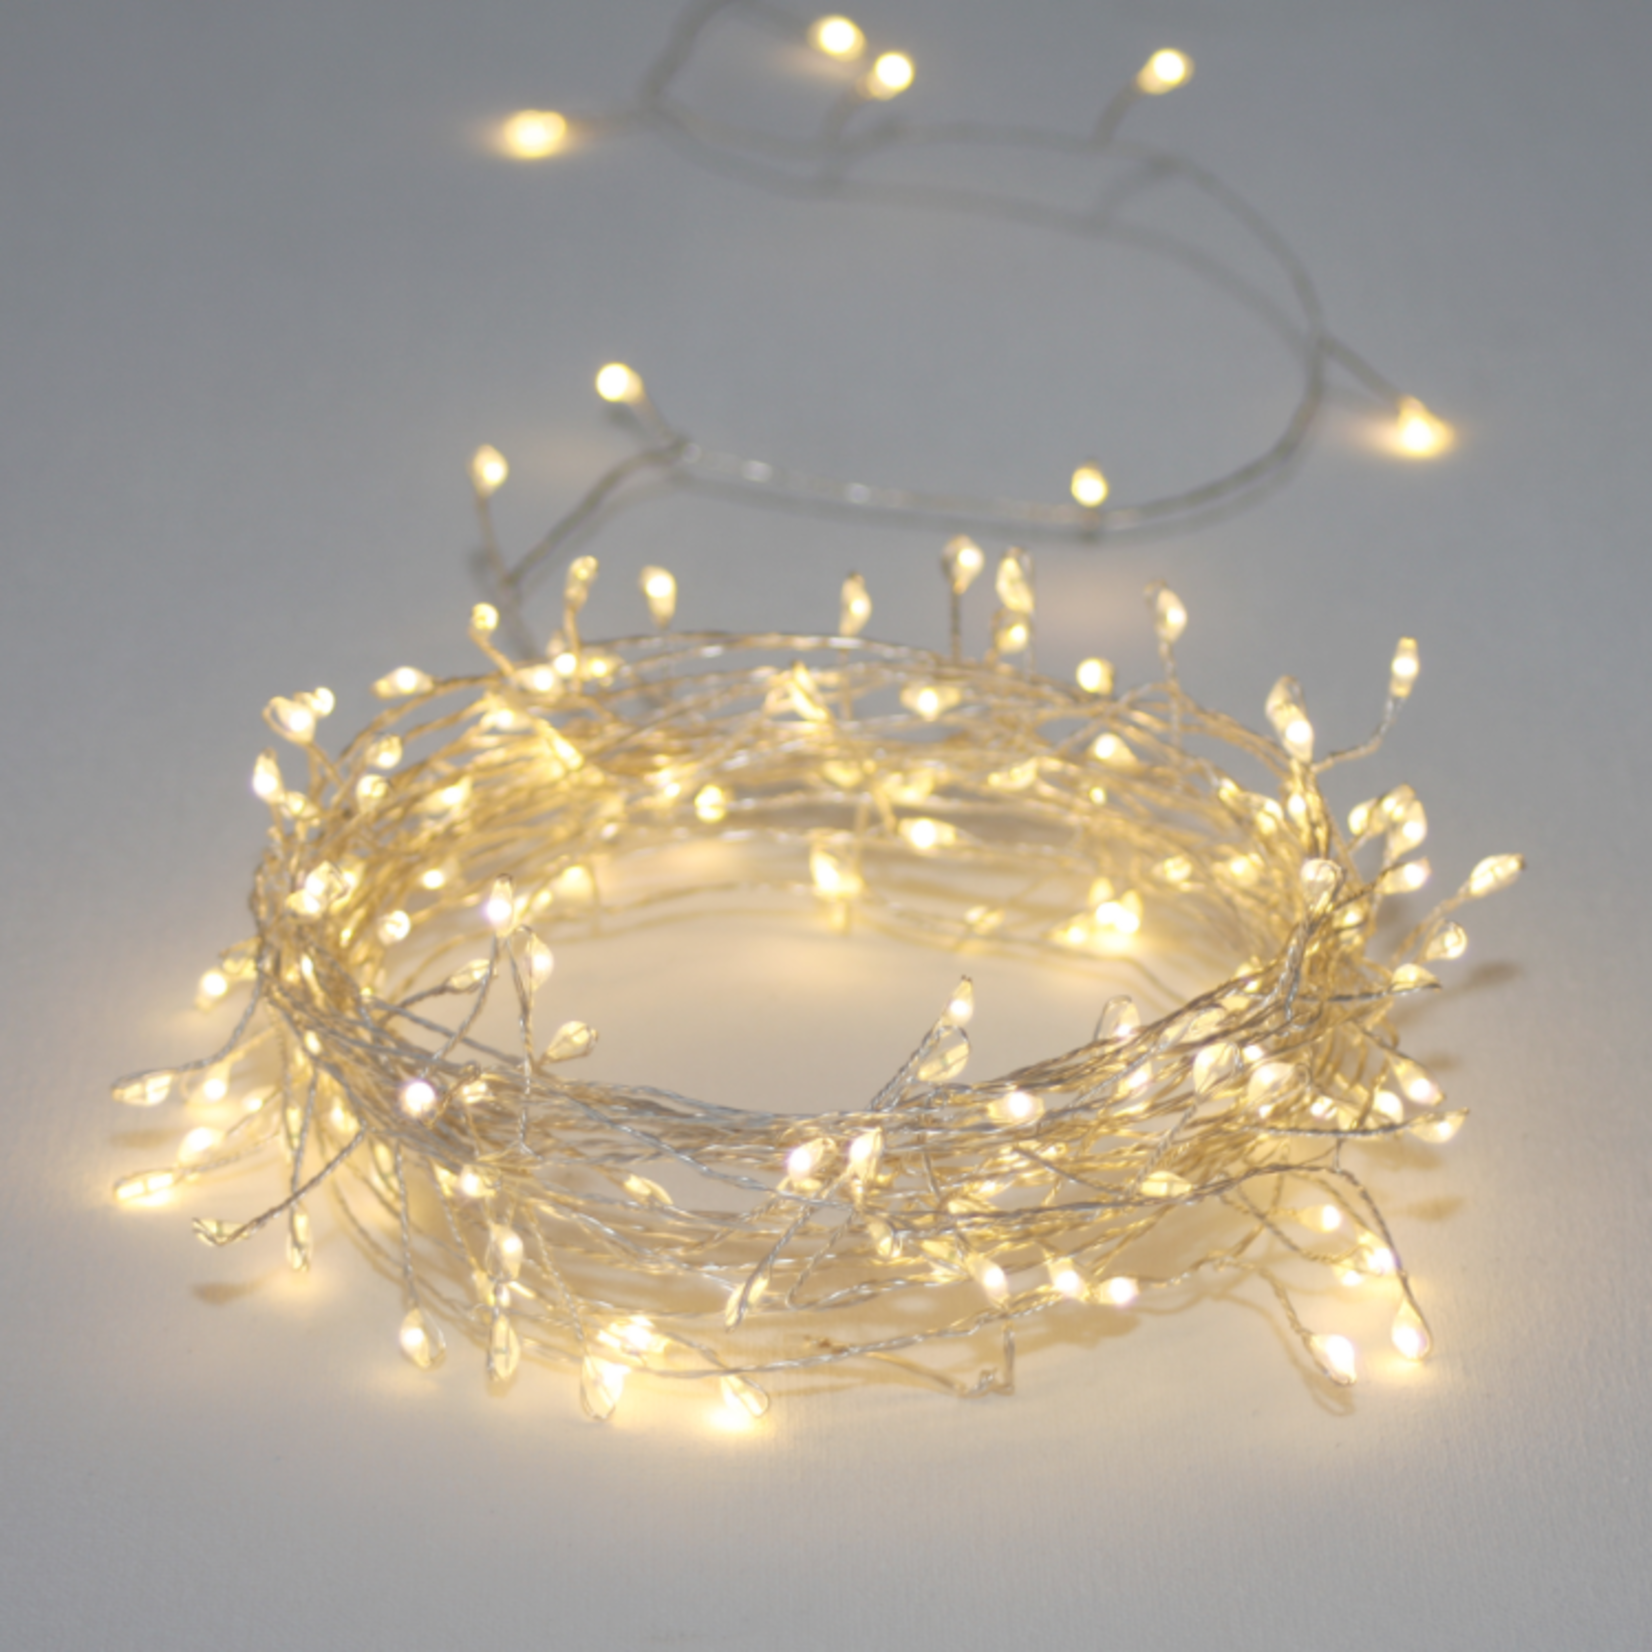 Light Style London Silver Cluster Fairy Lights 15M Long Indoor or Outdoor Mains